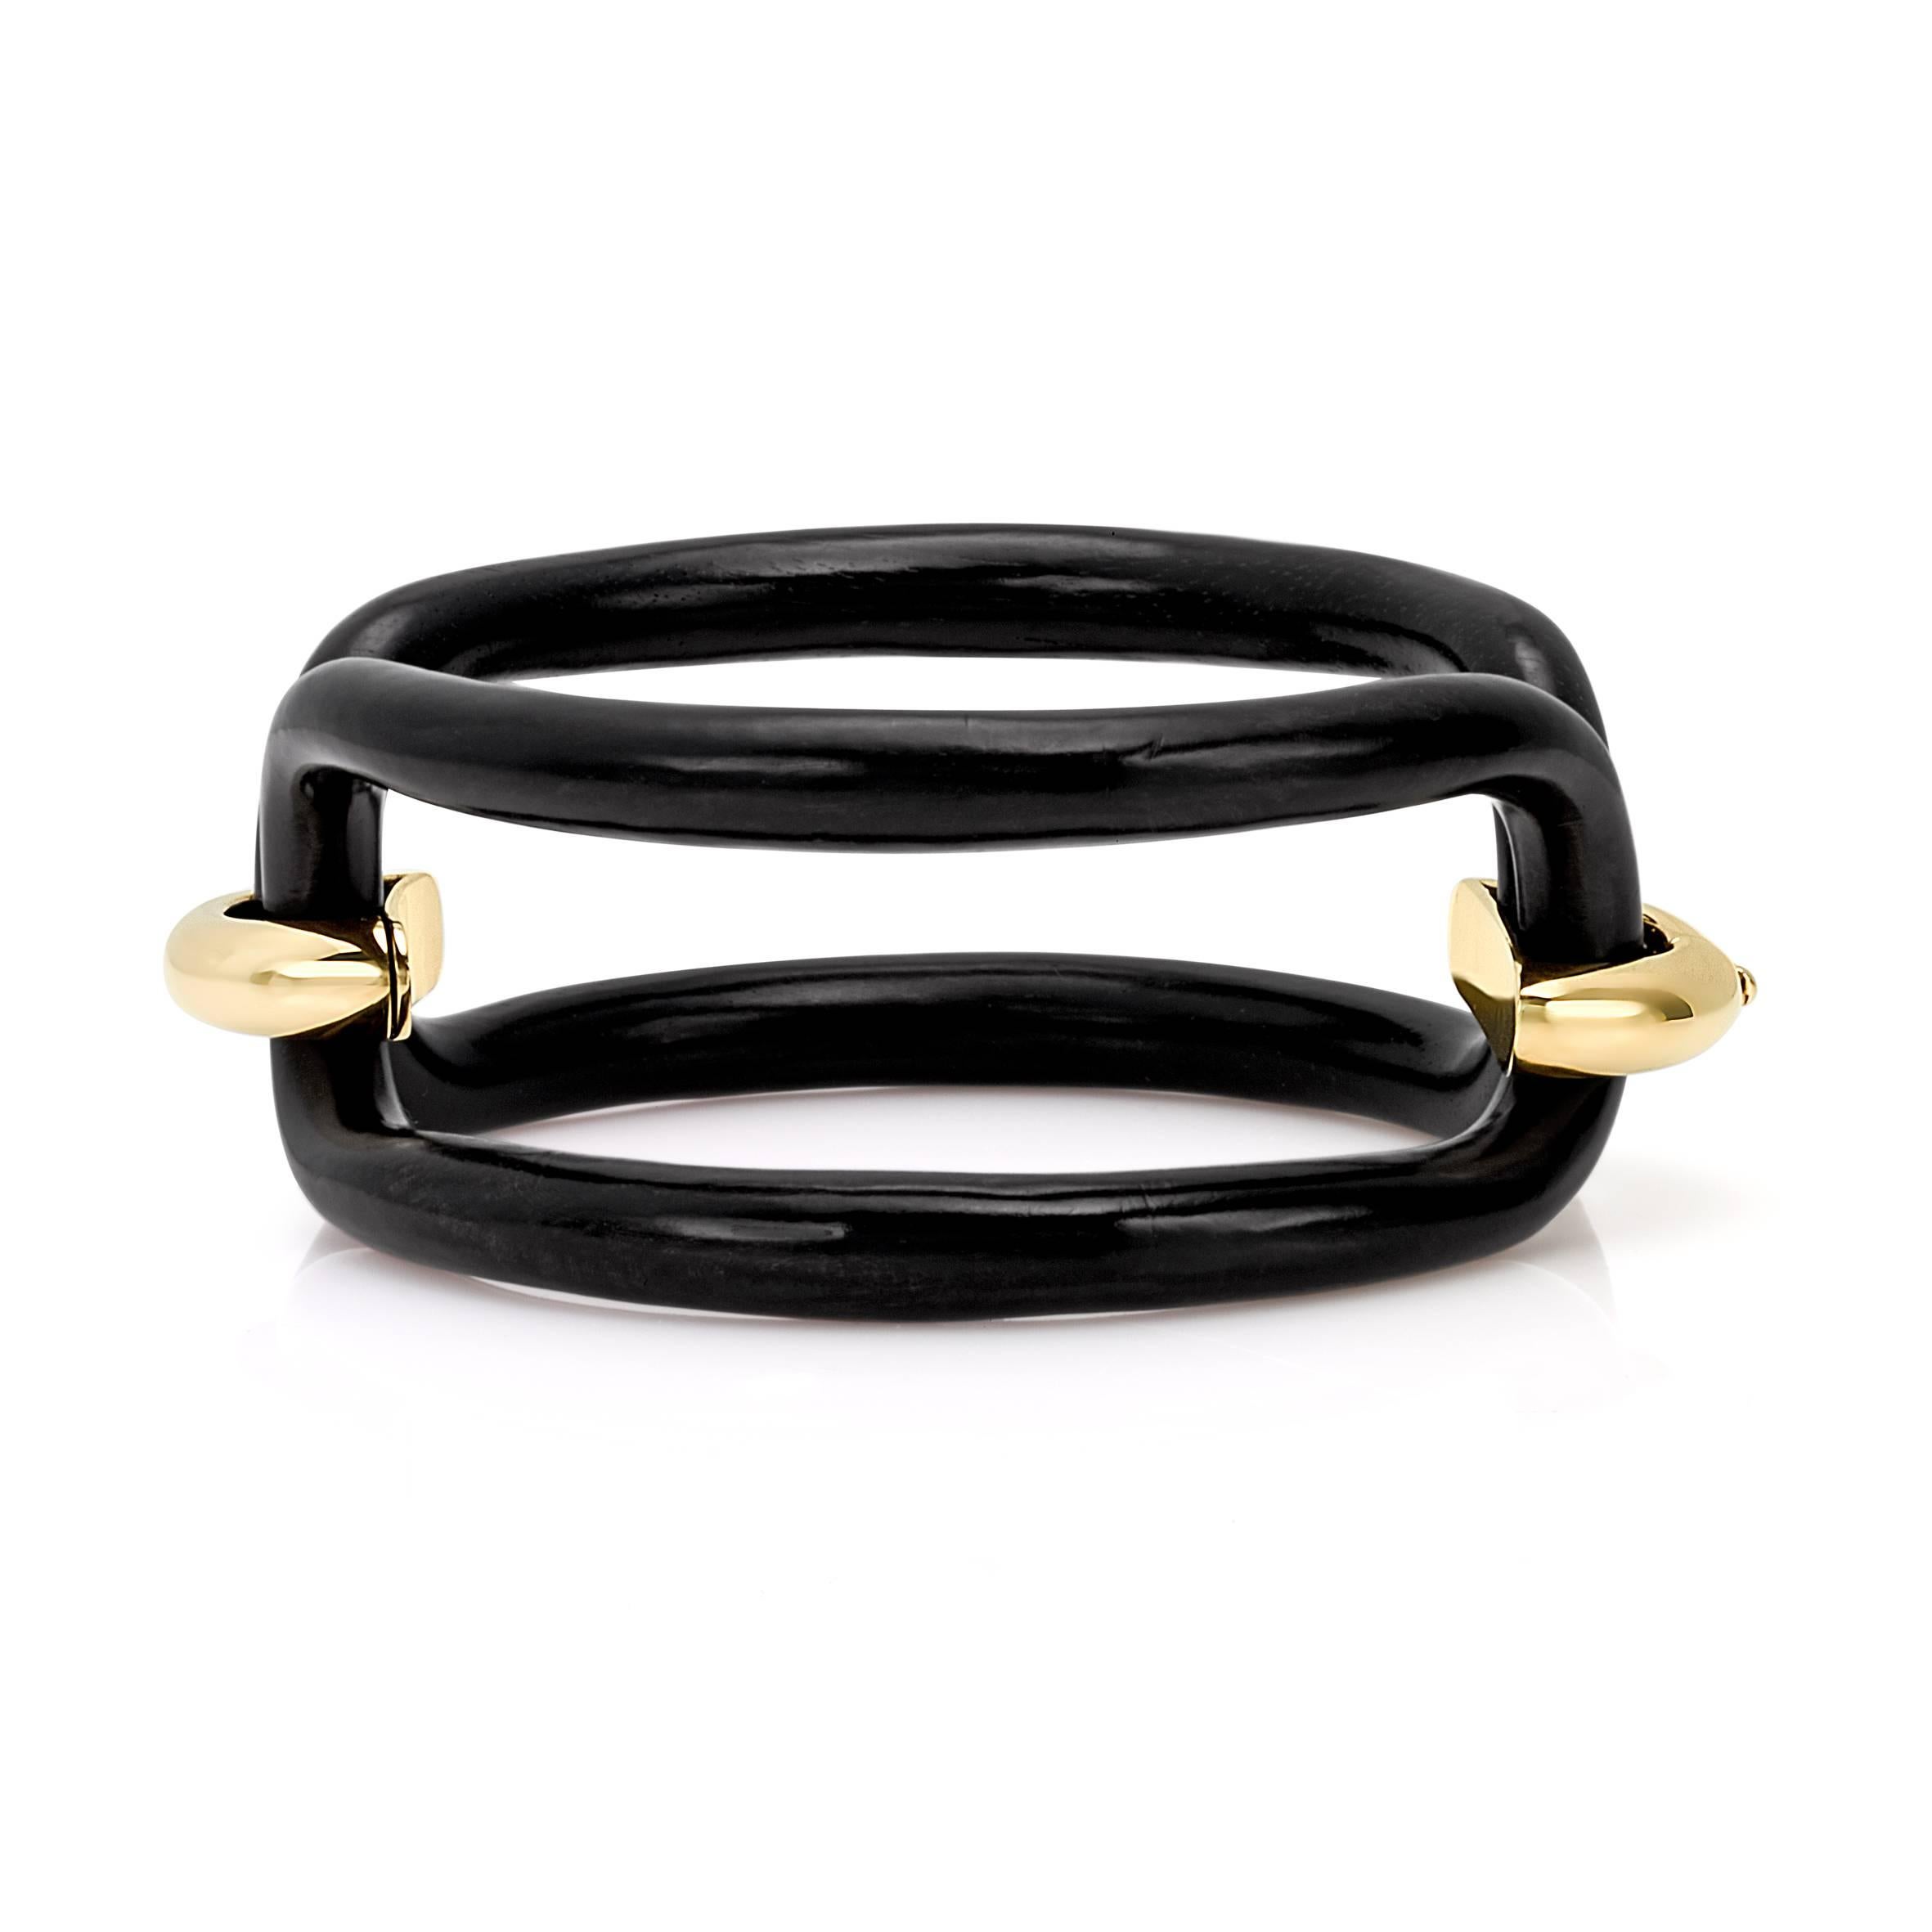 Roberta collection bangle in 18 kt  yellow gold and ebony
The newest and more popular collection of his year

the total weight of the gold is  gr 12.10

STAMP: 10 MI ITALY 750
